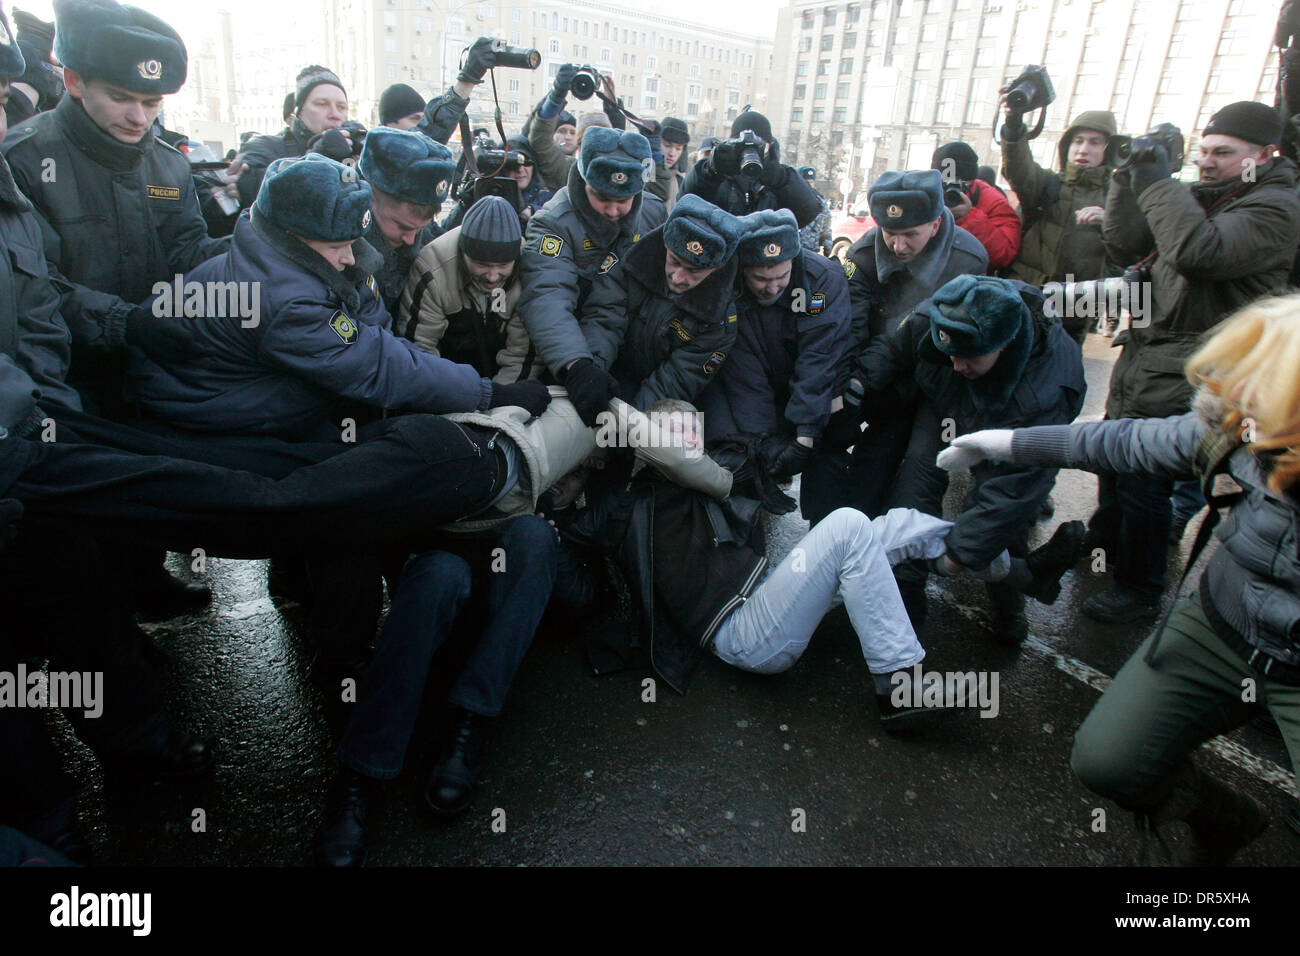 Jan 31, 2009 - Moscow, Russia - Russian police arrest a protester during an anti goverment rally in central Moscow. (Credit Image: © PhotoXpress/ZUMA Press) RESTRICTIONS: * North and South America Rights Only * Stock Photo